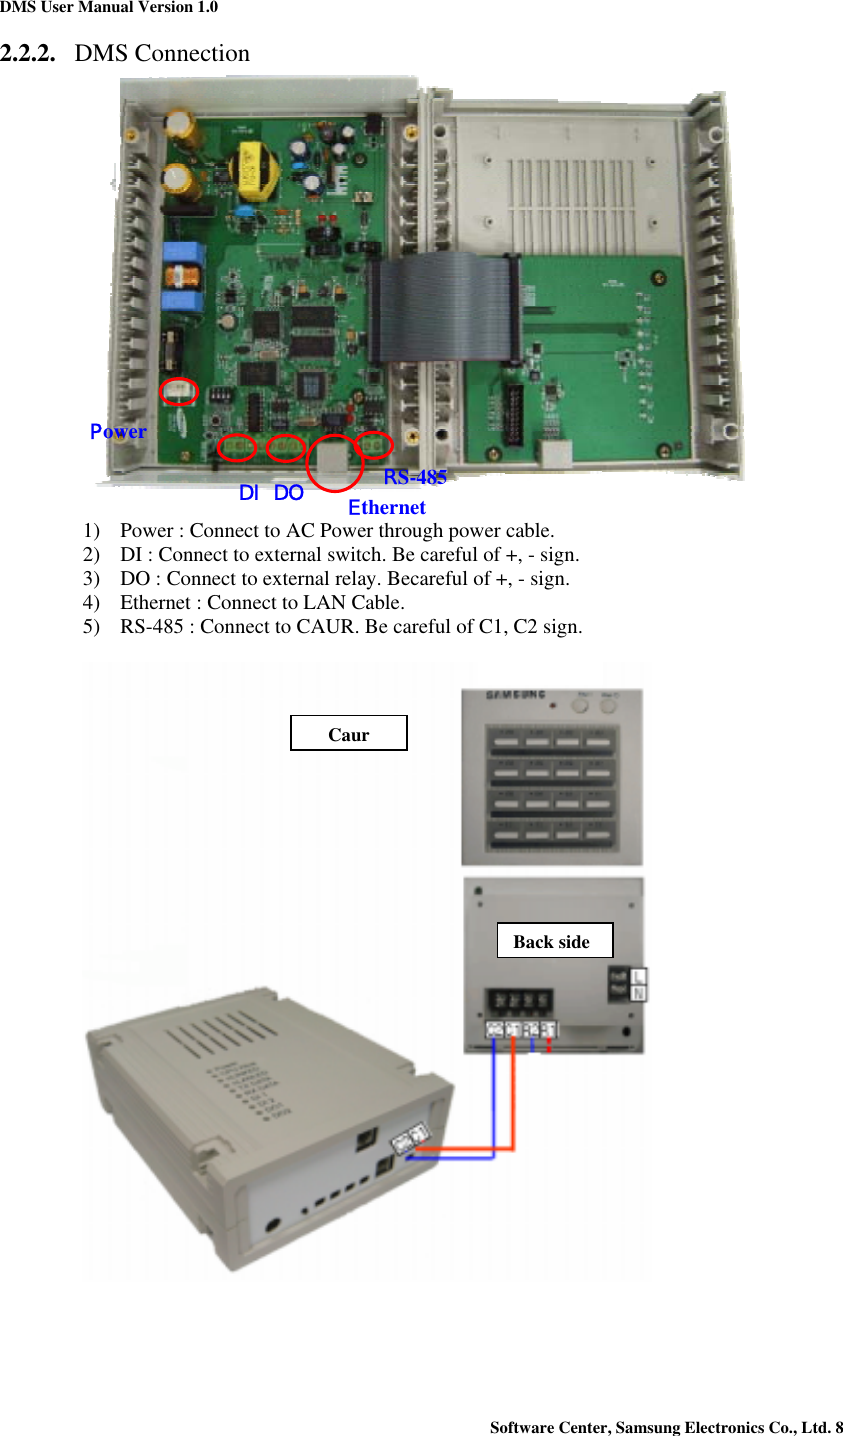 DMS User Manual Version 1.0 Software Center, Samsung Electronics Co., Ltd. 8   2.2.2. DMS Connection   1) Power : Connect to AC Power through power cable. 2) DI : Connect to external switch. Be careful of +, - sign. 3) DO : Connect to external relay. Becareful of +, - sign. 4) Ethernet : Connect to LAN Cable. 5) RS-485 : Connect to CAUR. Be careful of C1, C2 sign.      DI DO PowerEthernet RS-485 Back sideCaur